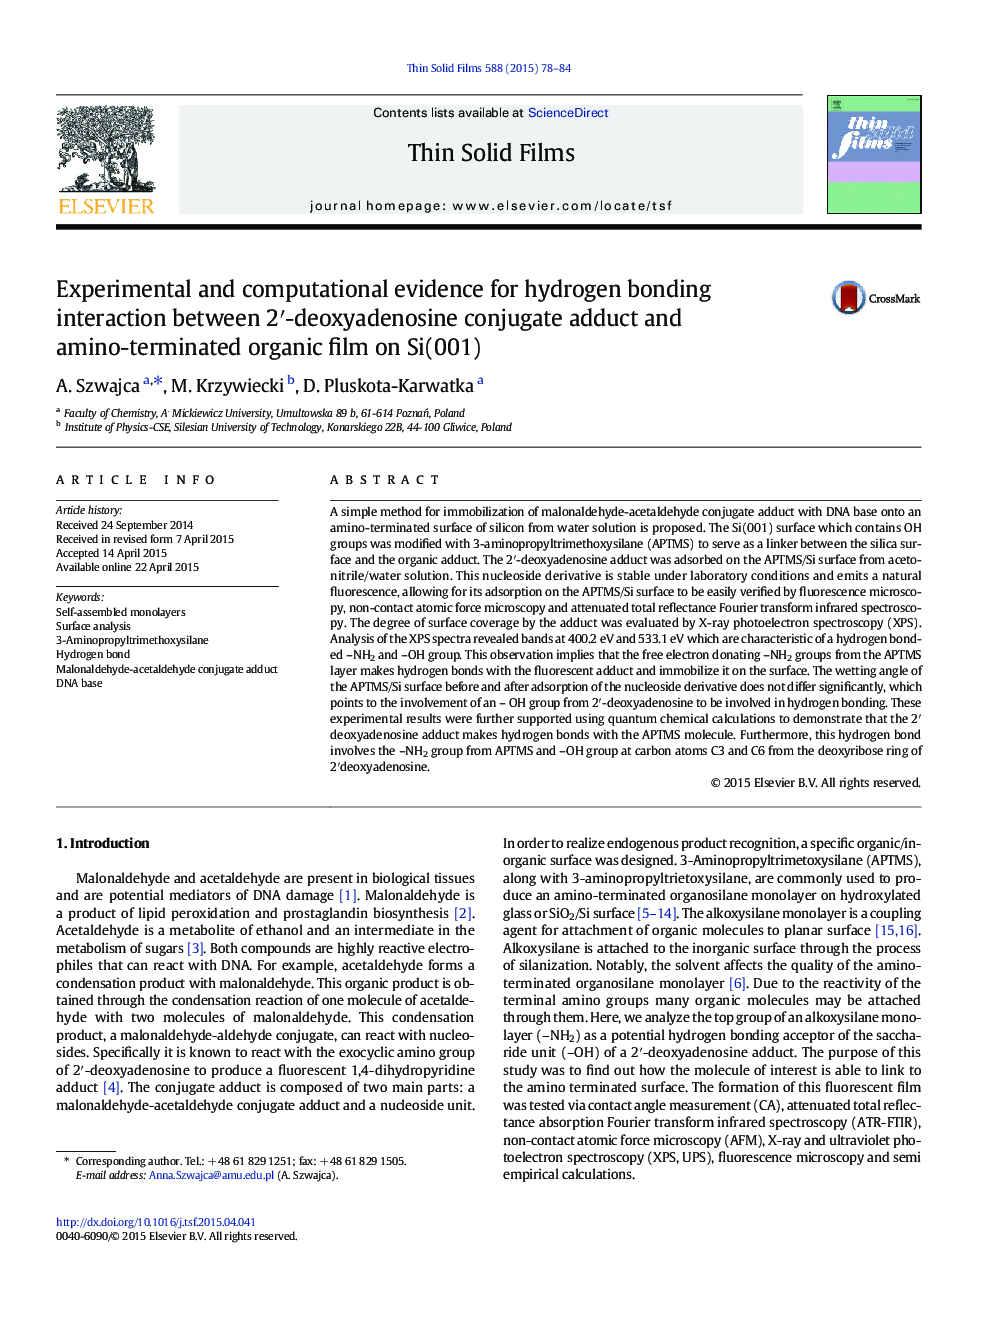 Experimental and computational evidence for hydrogen bonding interaction between 2′-deoxyadenosine conjugate adduct and amino-terminated organic film on Si(001)